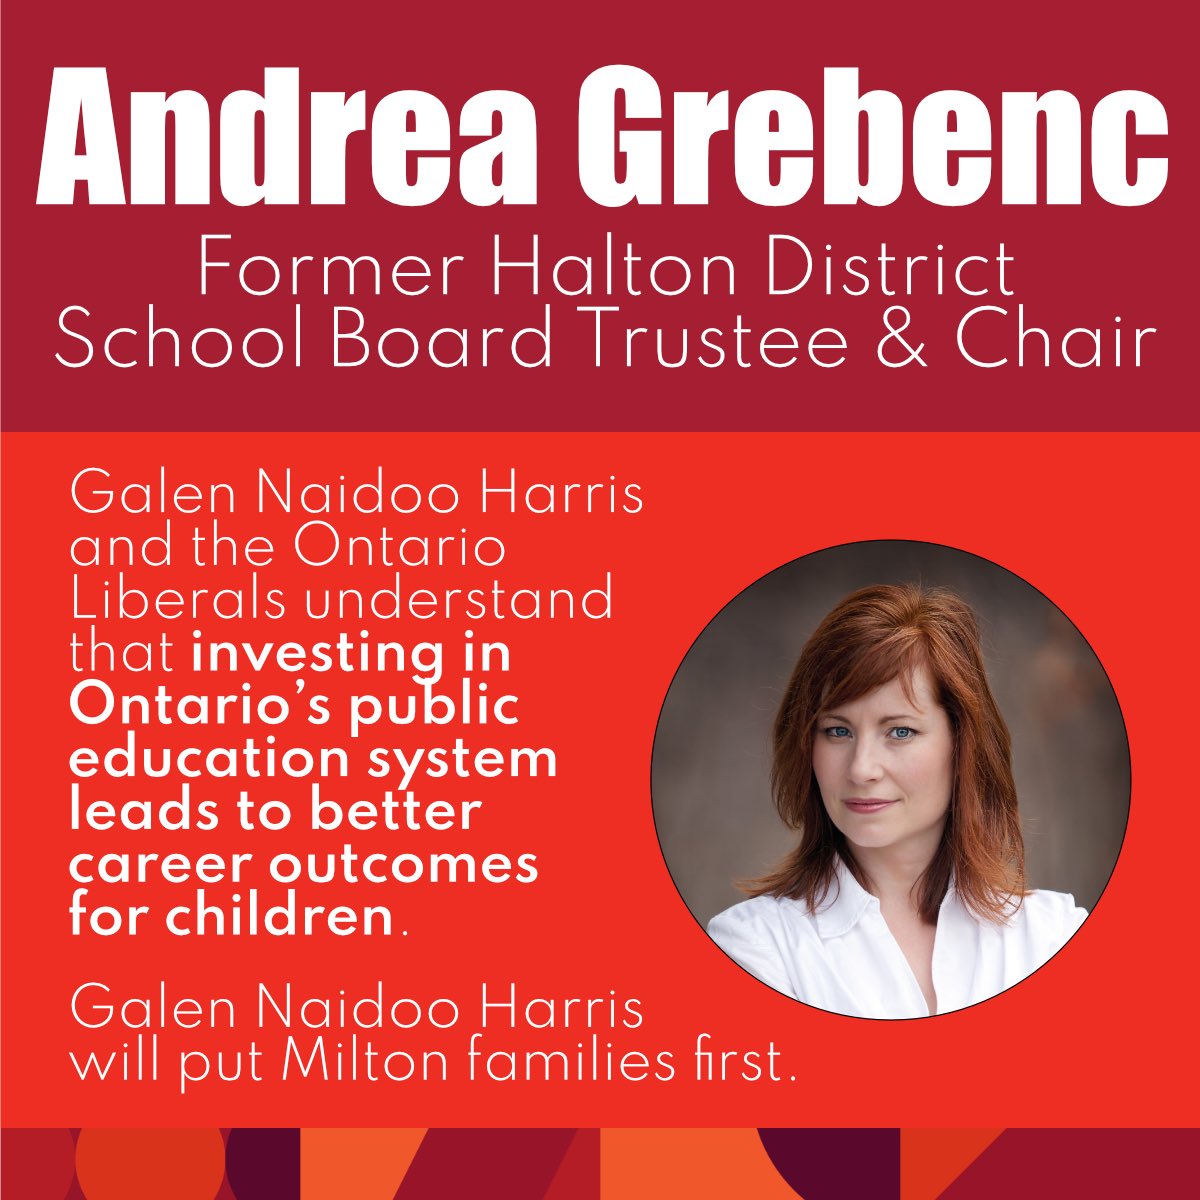 I am proud to be endorsed by Andrea Grebenc, former Halton District School Board Trustee & Chair. “Galen Naidoo Harris and the Ontario Liberals understand that investing in Ontario’s public education system leads to better career outcomes for children. Galen Naidoo Harris will…